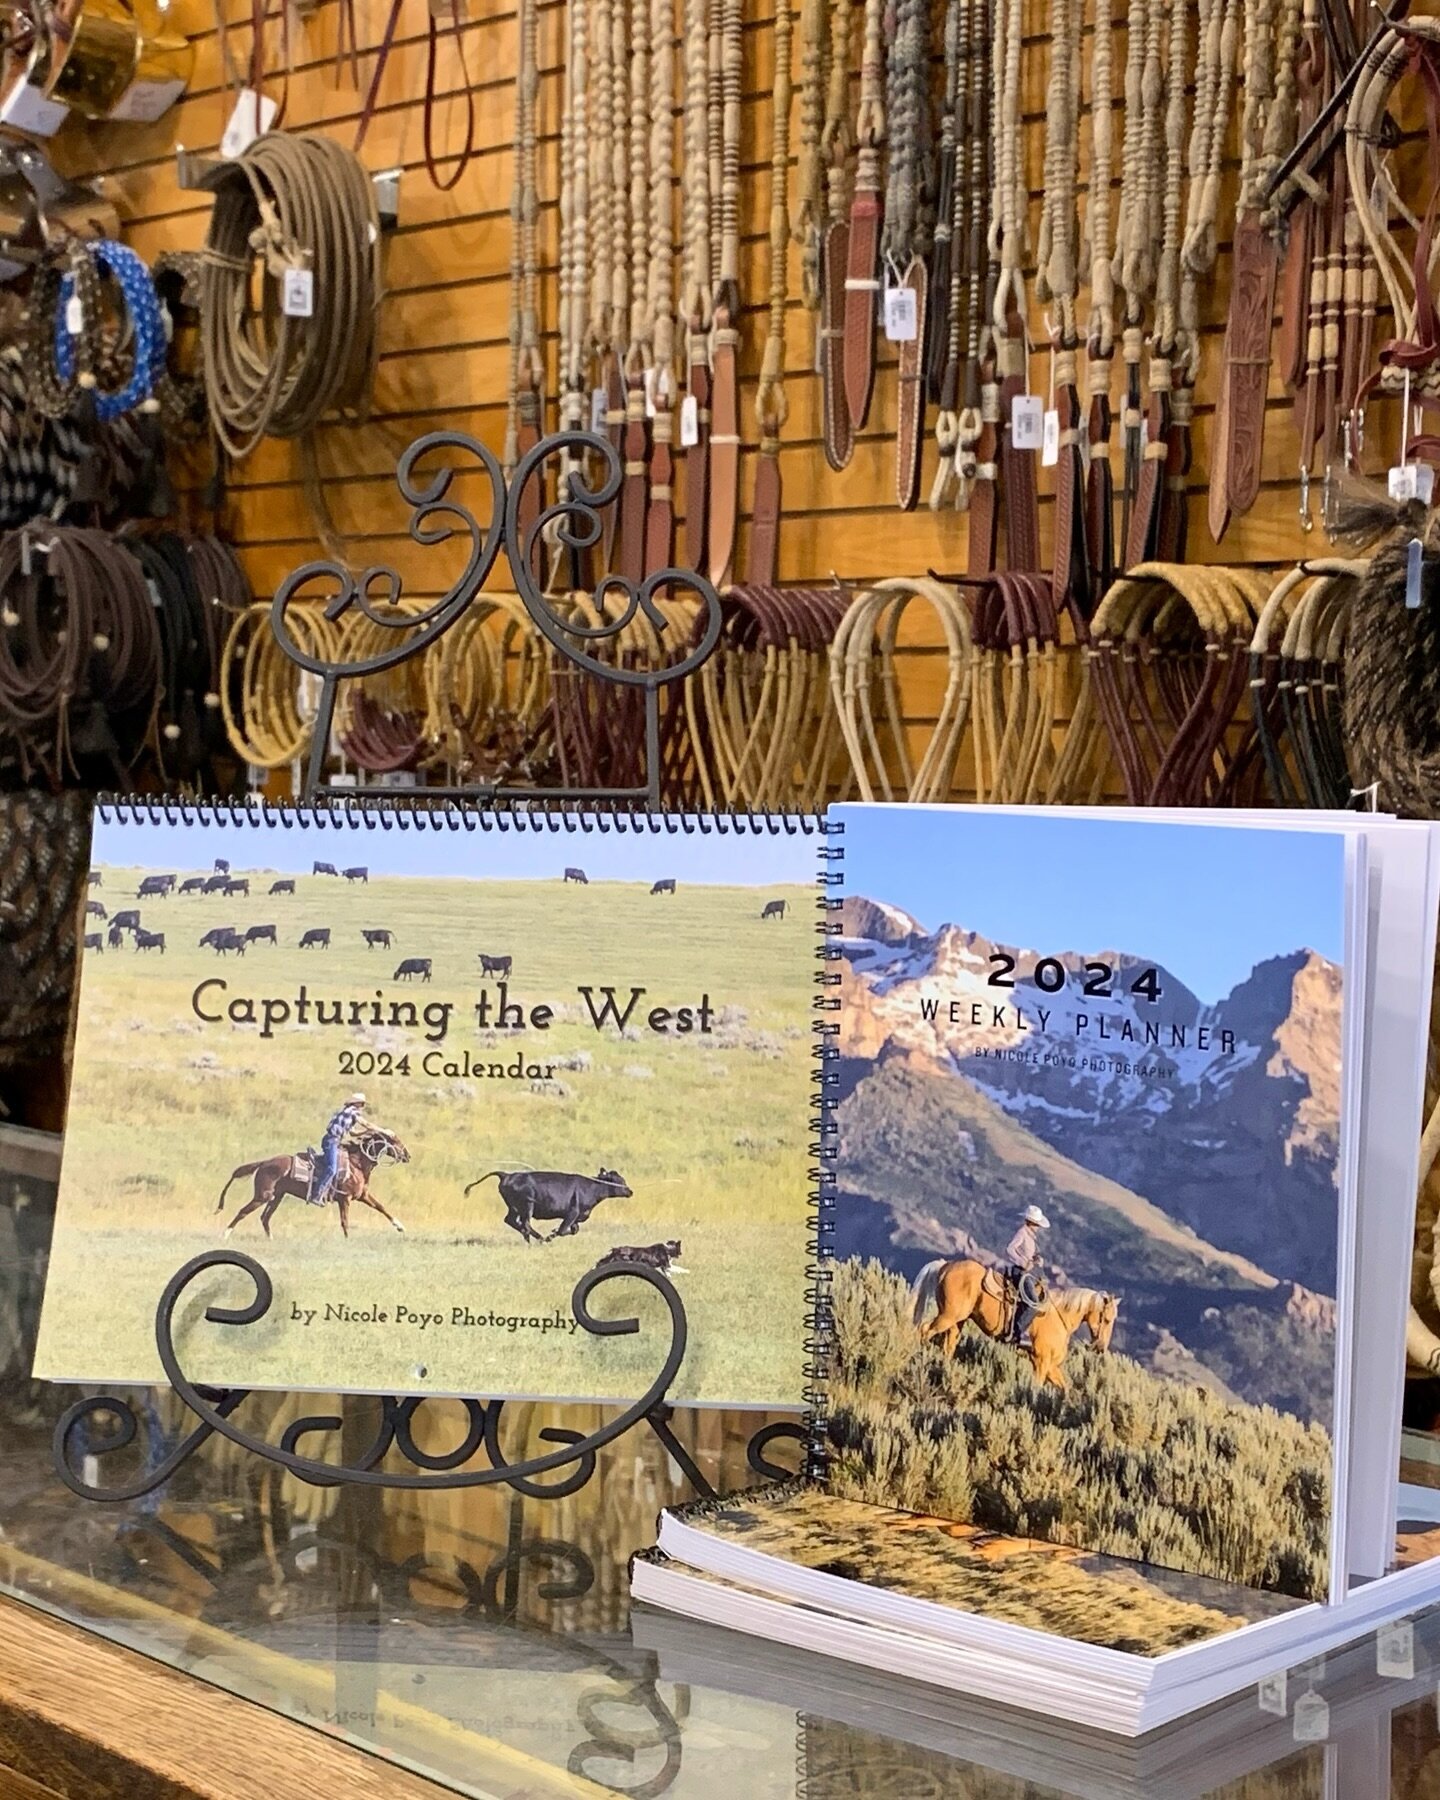 🛍️ Shop with a Small Business this Saturday! 

Planners and Calendars are available at these select locations:

📍Bruneau One Stop - Bruneau, Idaho 
📍J.M. Capriola - Elko, Nevada
📍Vickers Western Store - Twin Falls, Idaho
📍Double A Feeds, Inc - B